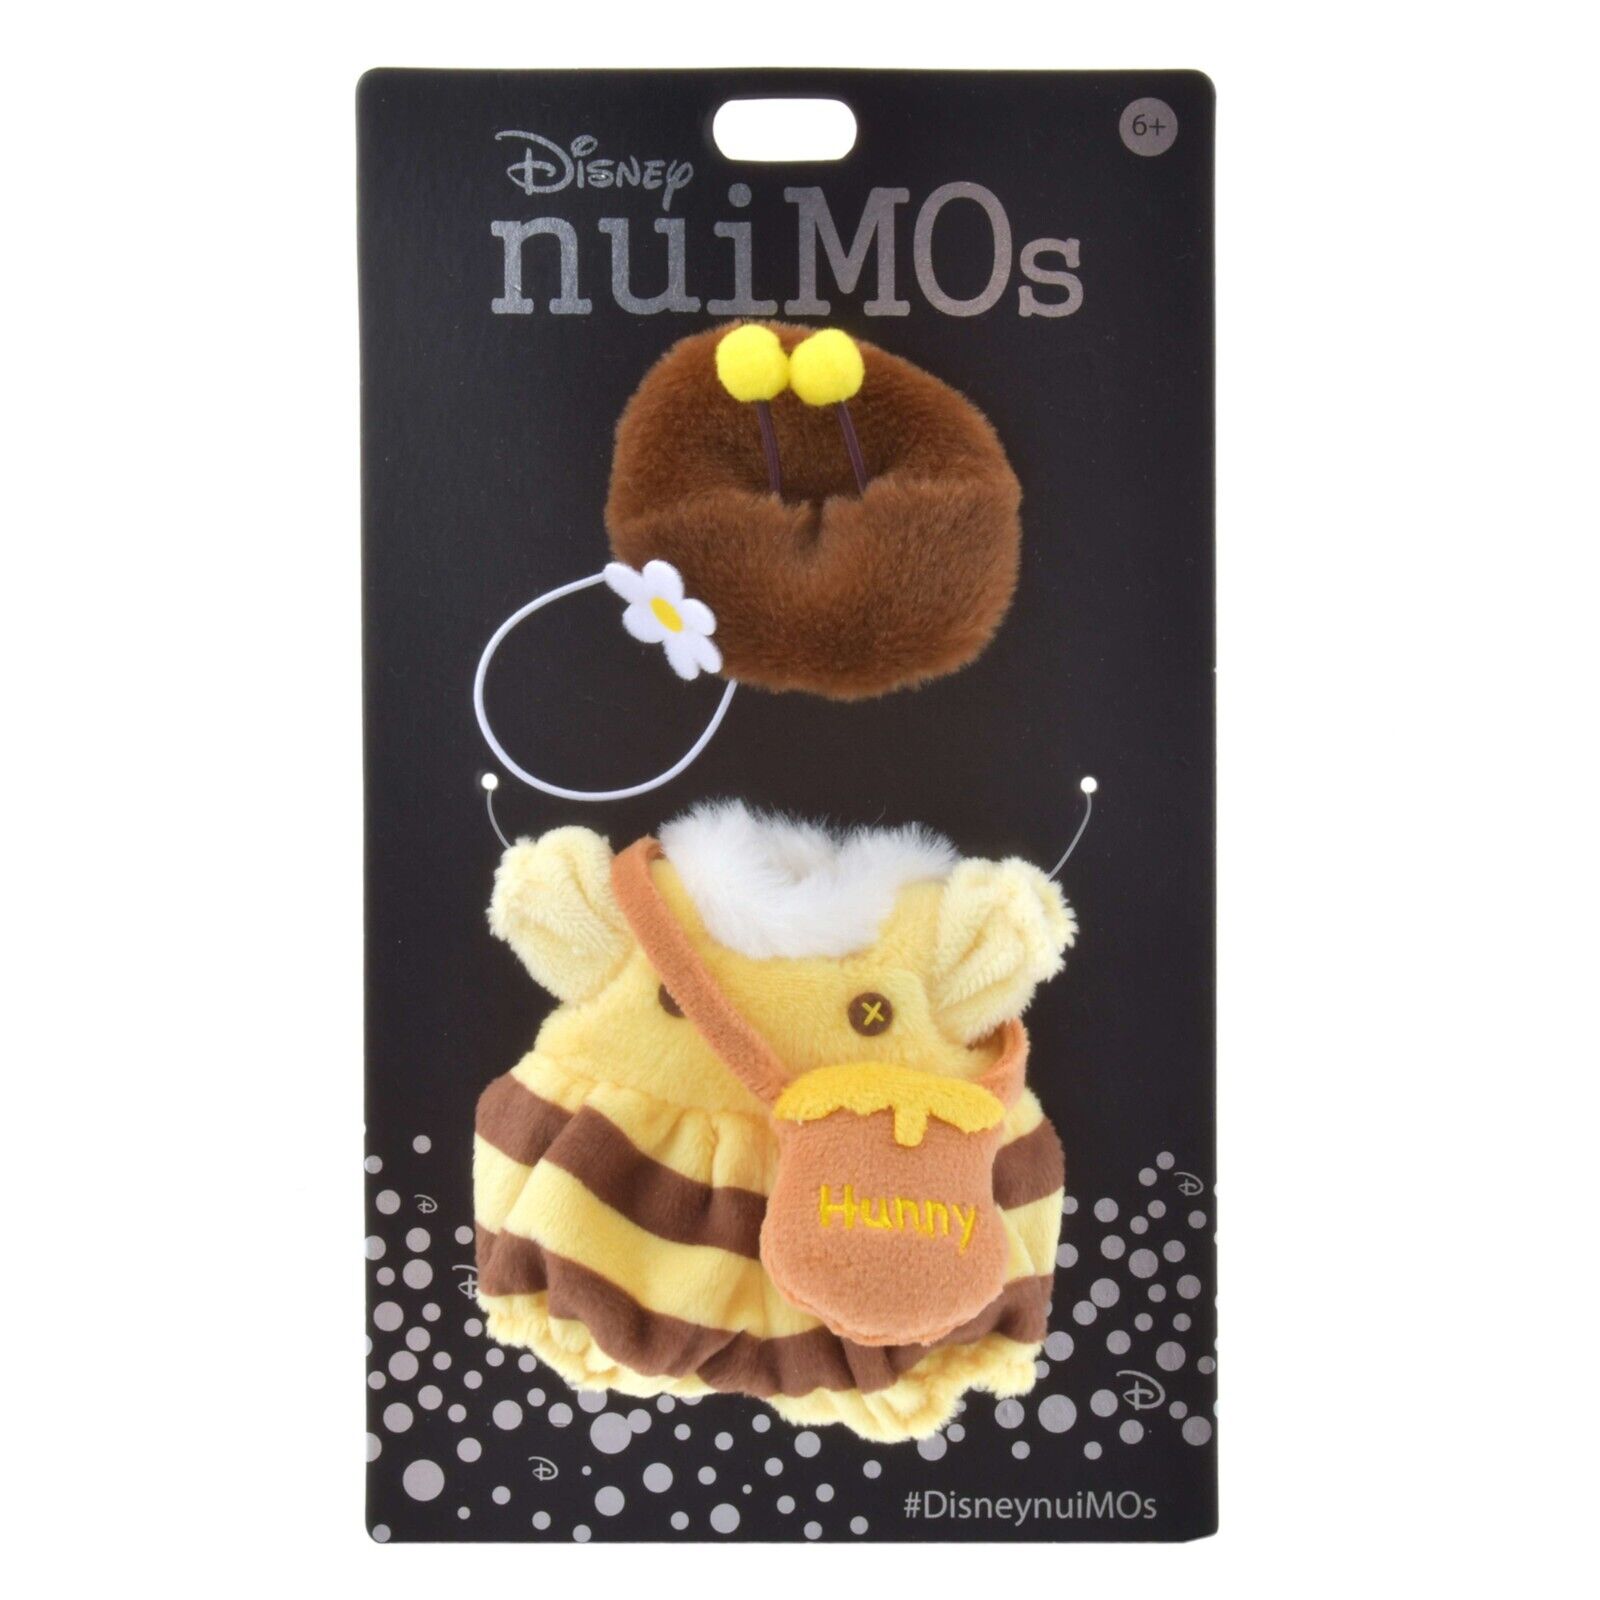 Japan Tokyo Disney Store nuiMOs Plush Toy Costume Overall Set BEE Pooh